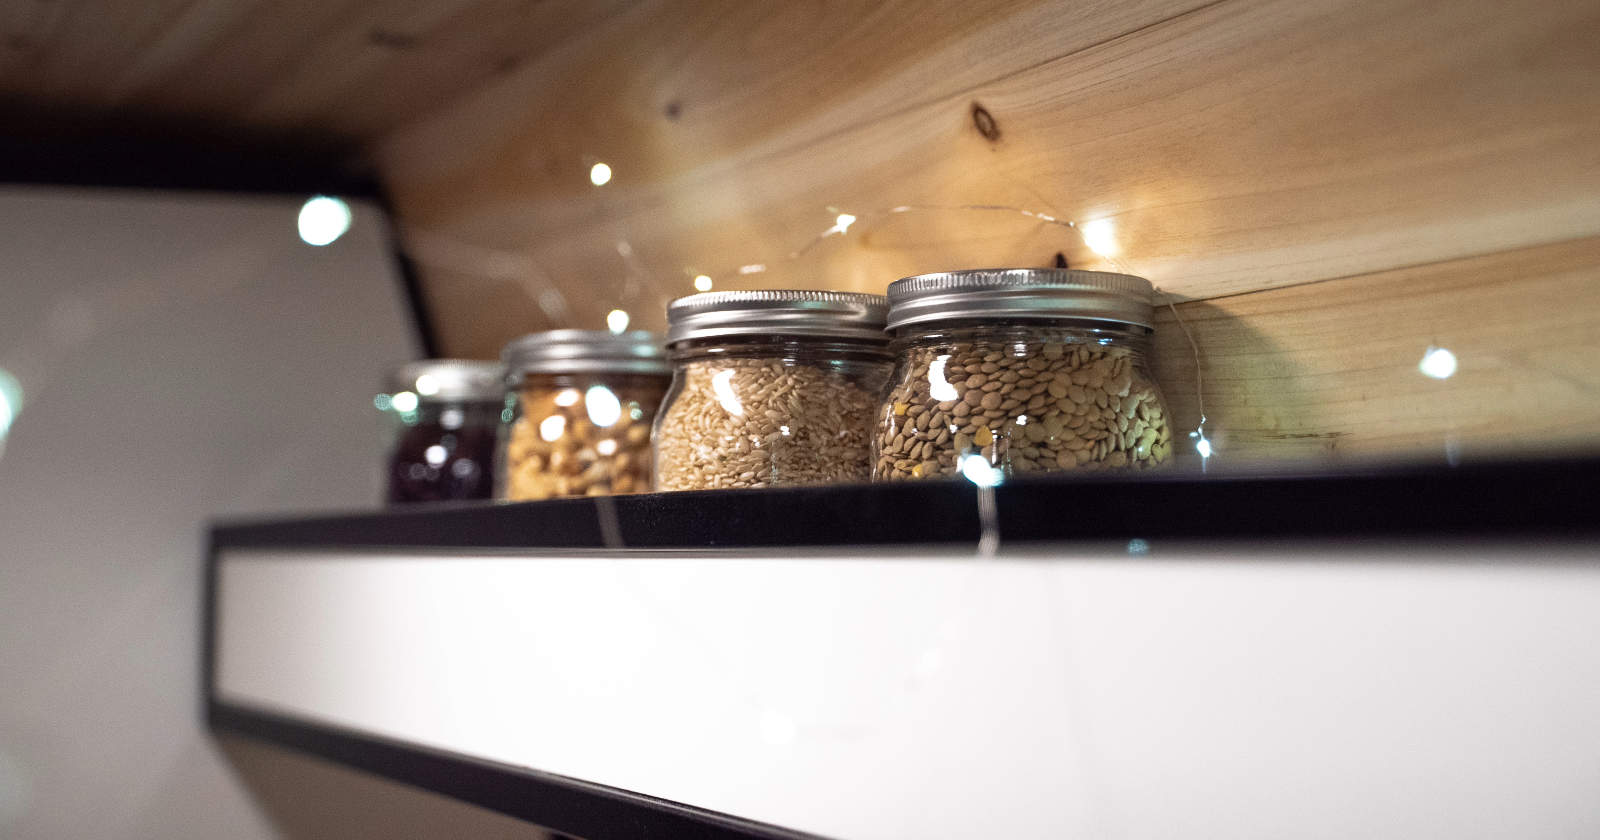 Glass jars filled with assorted grains and seeds, neatly lined on a black shelf against a wooden wall, with soft fairy lights reflecting in the background.